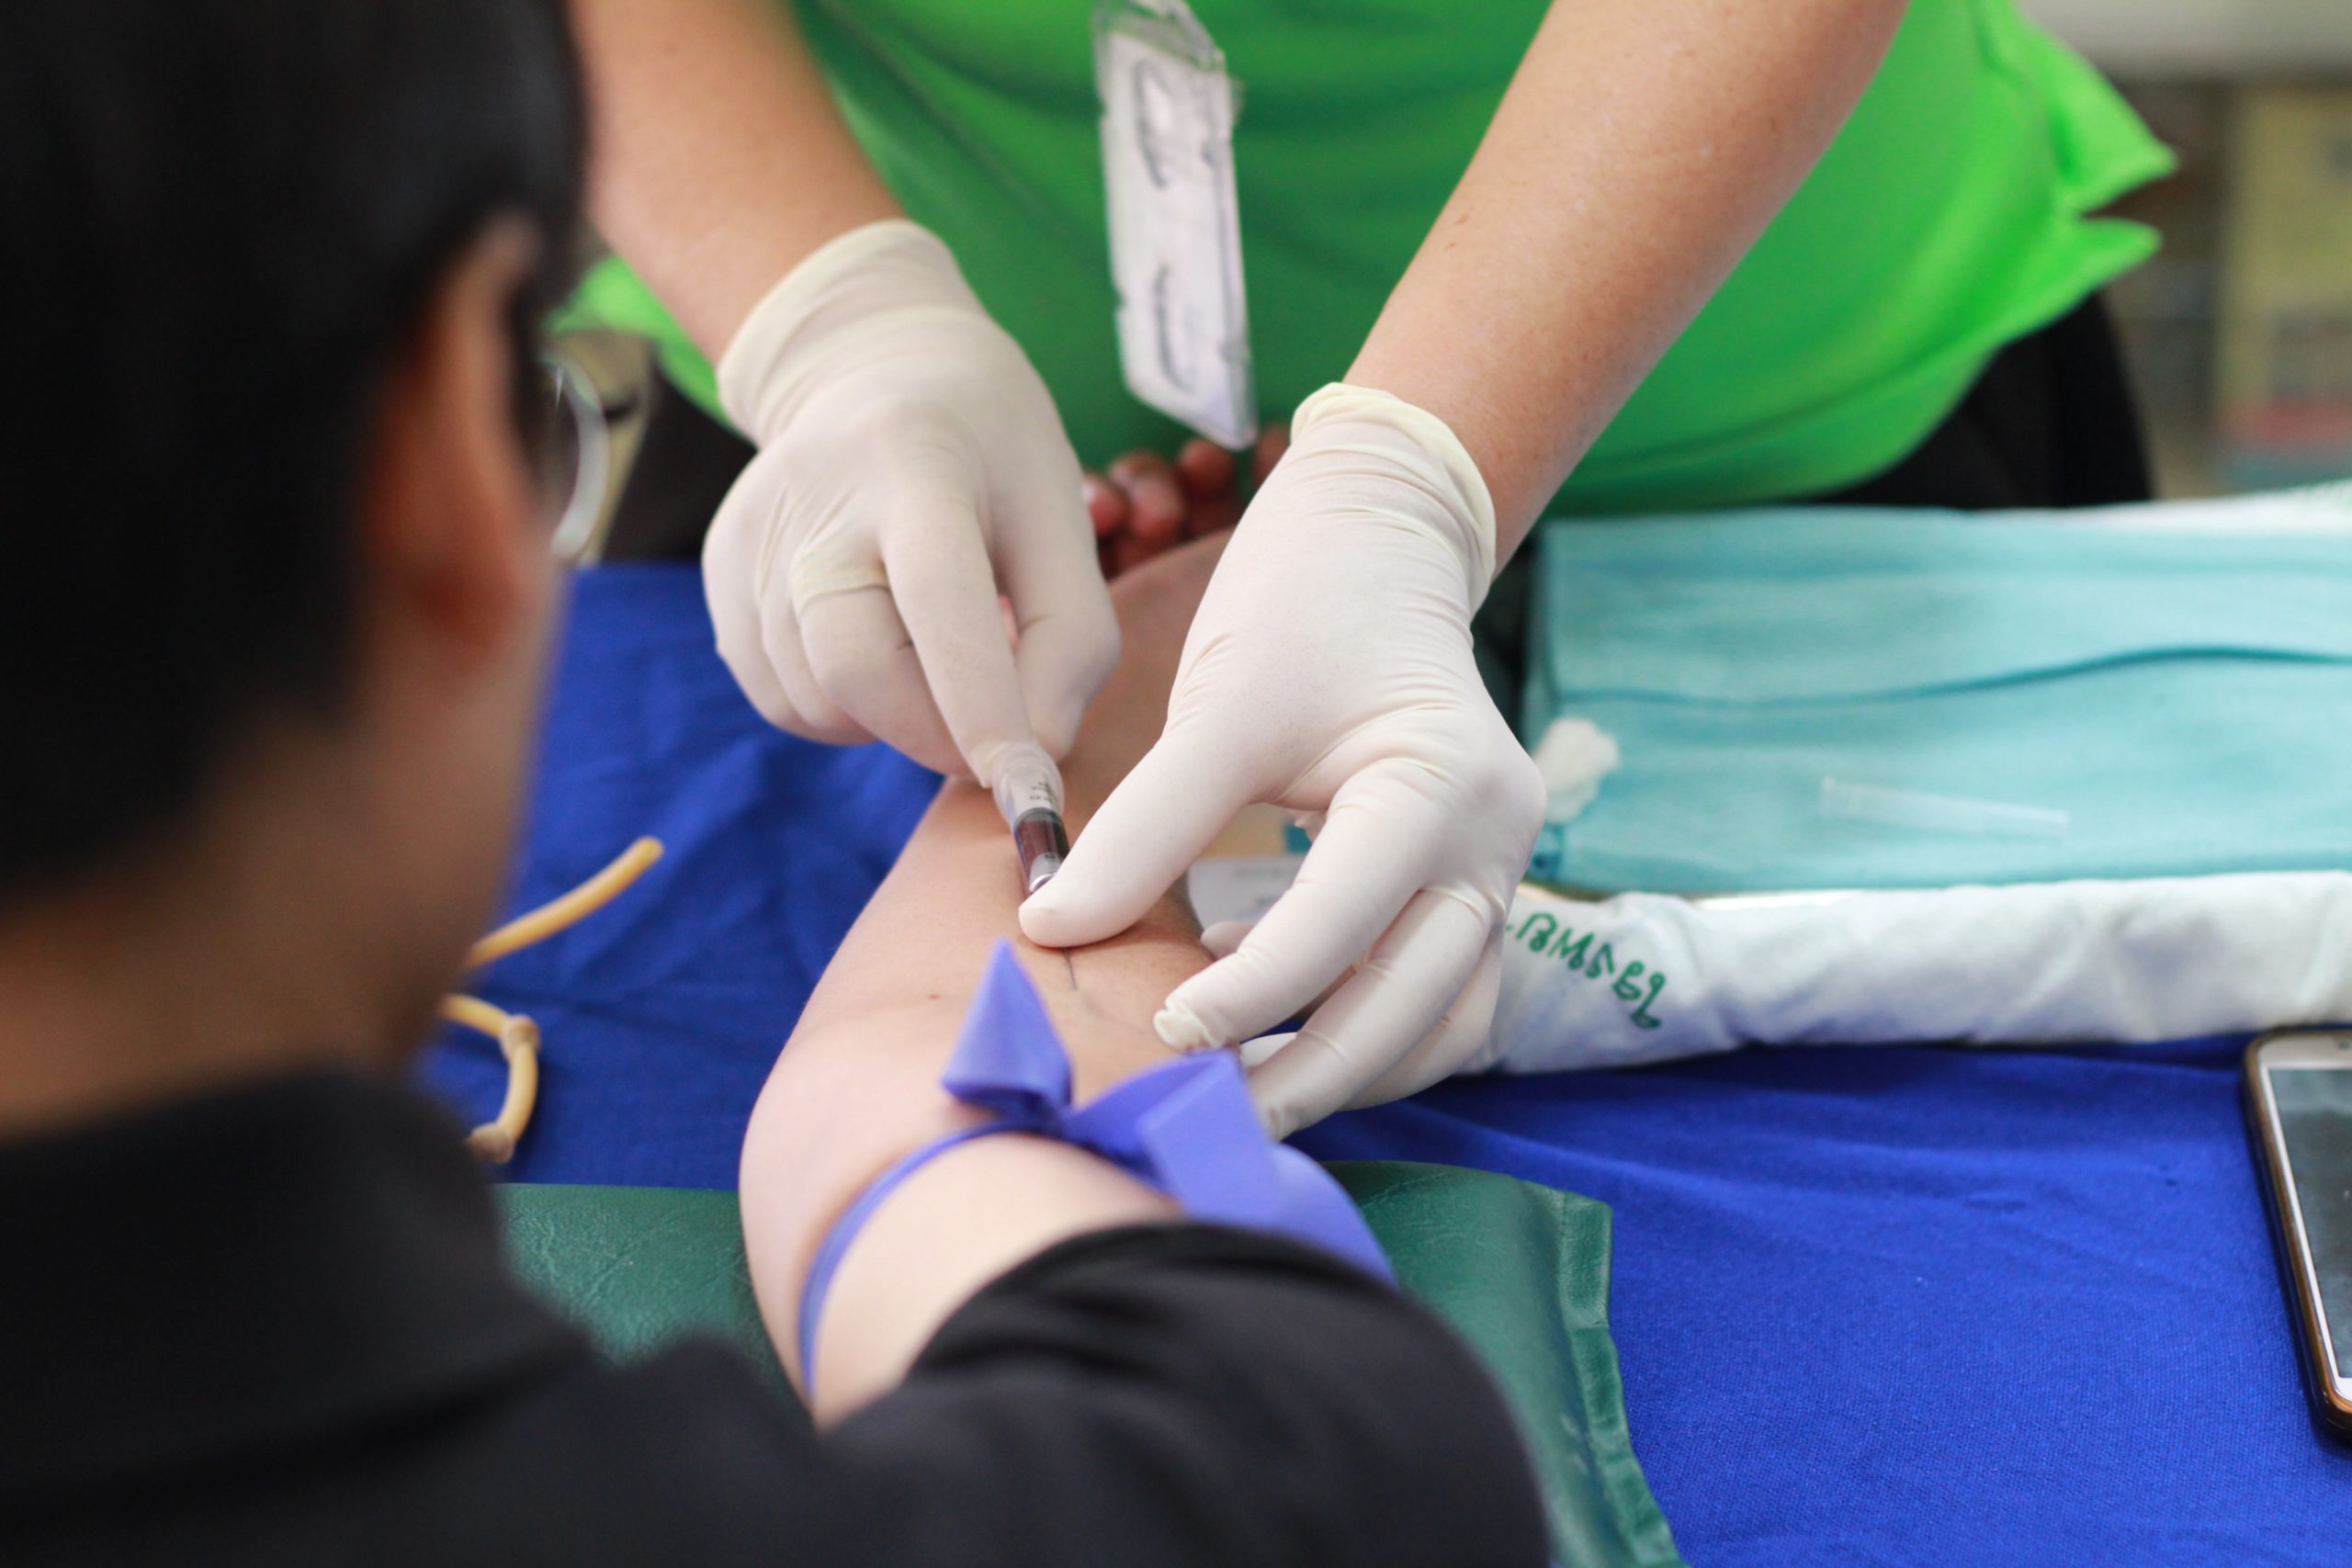 A nurse wearing gloves uses a hyperdermic needle to take a blood sample from a patients' arm, as seen from over the patient's shoulder.